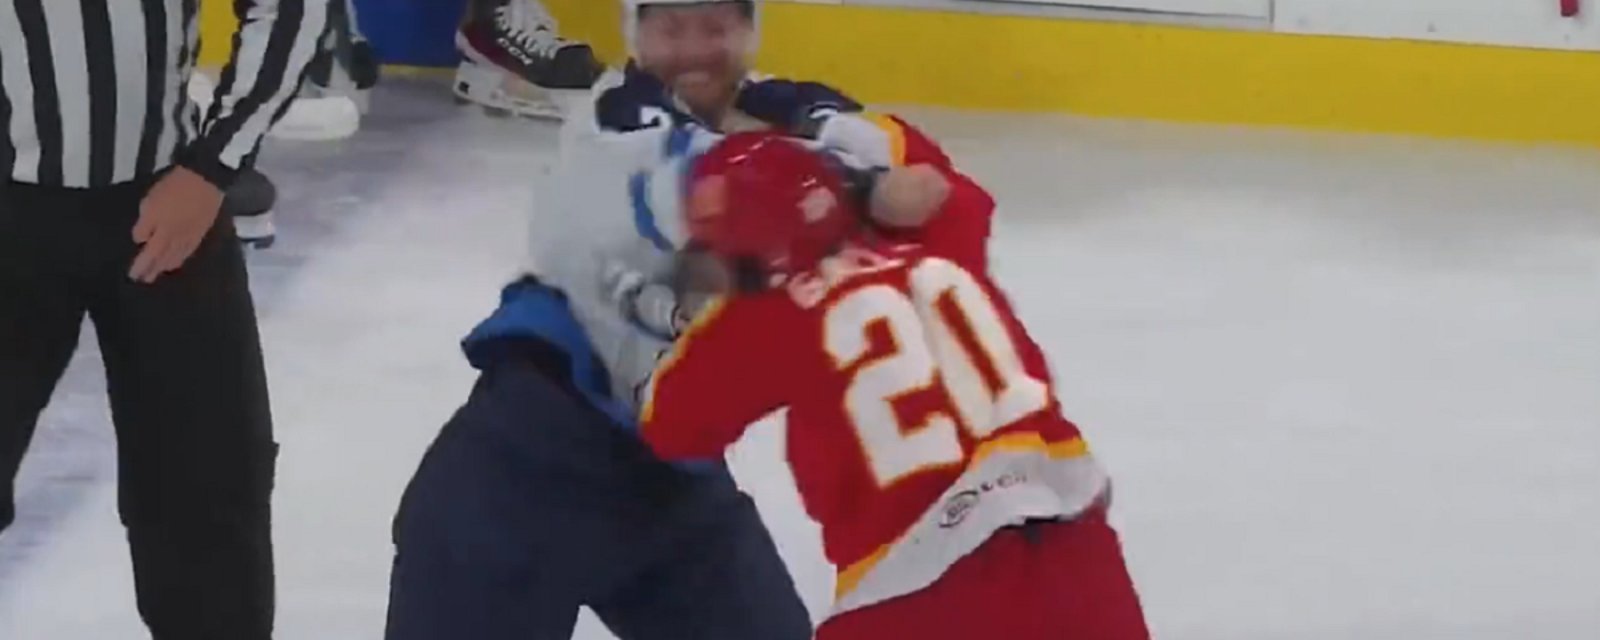 Gallant and Viel deliver the best hockey fight in years.